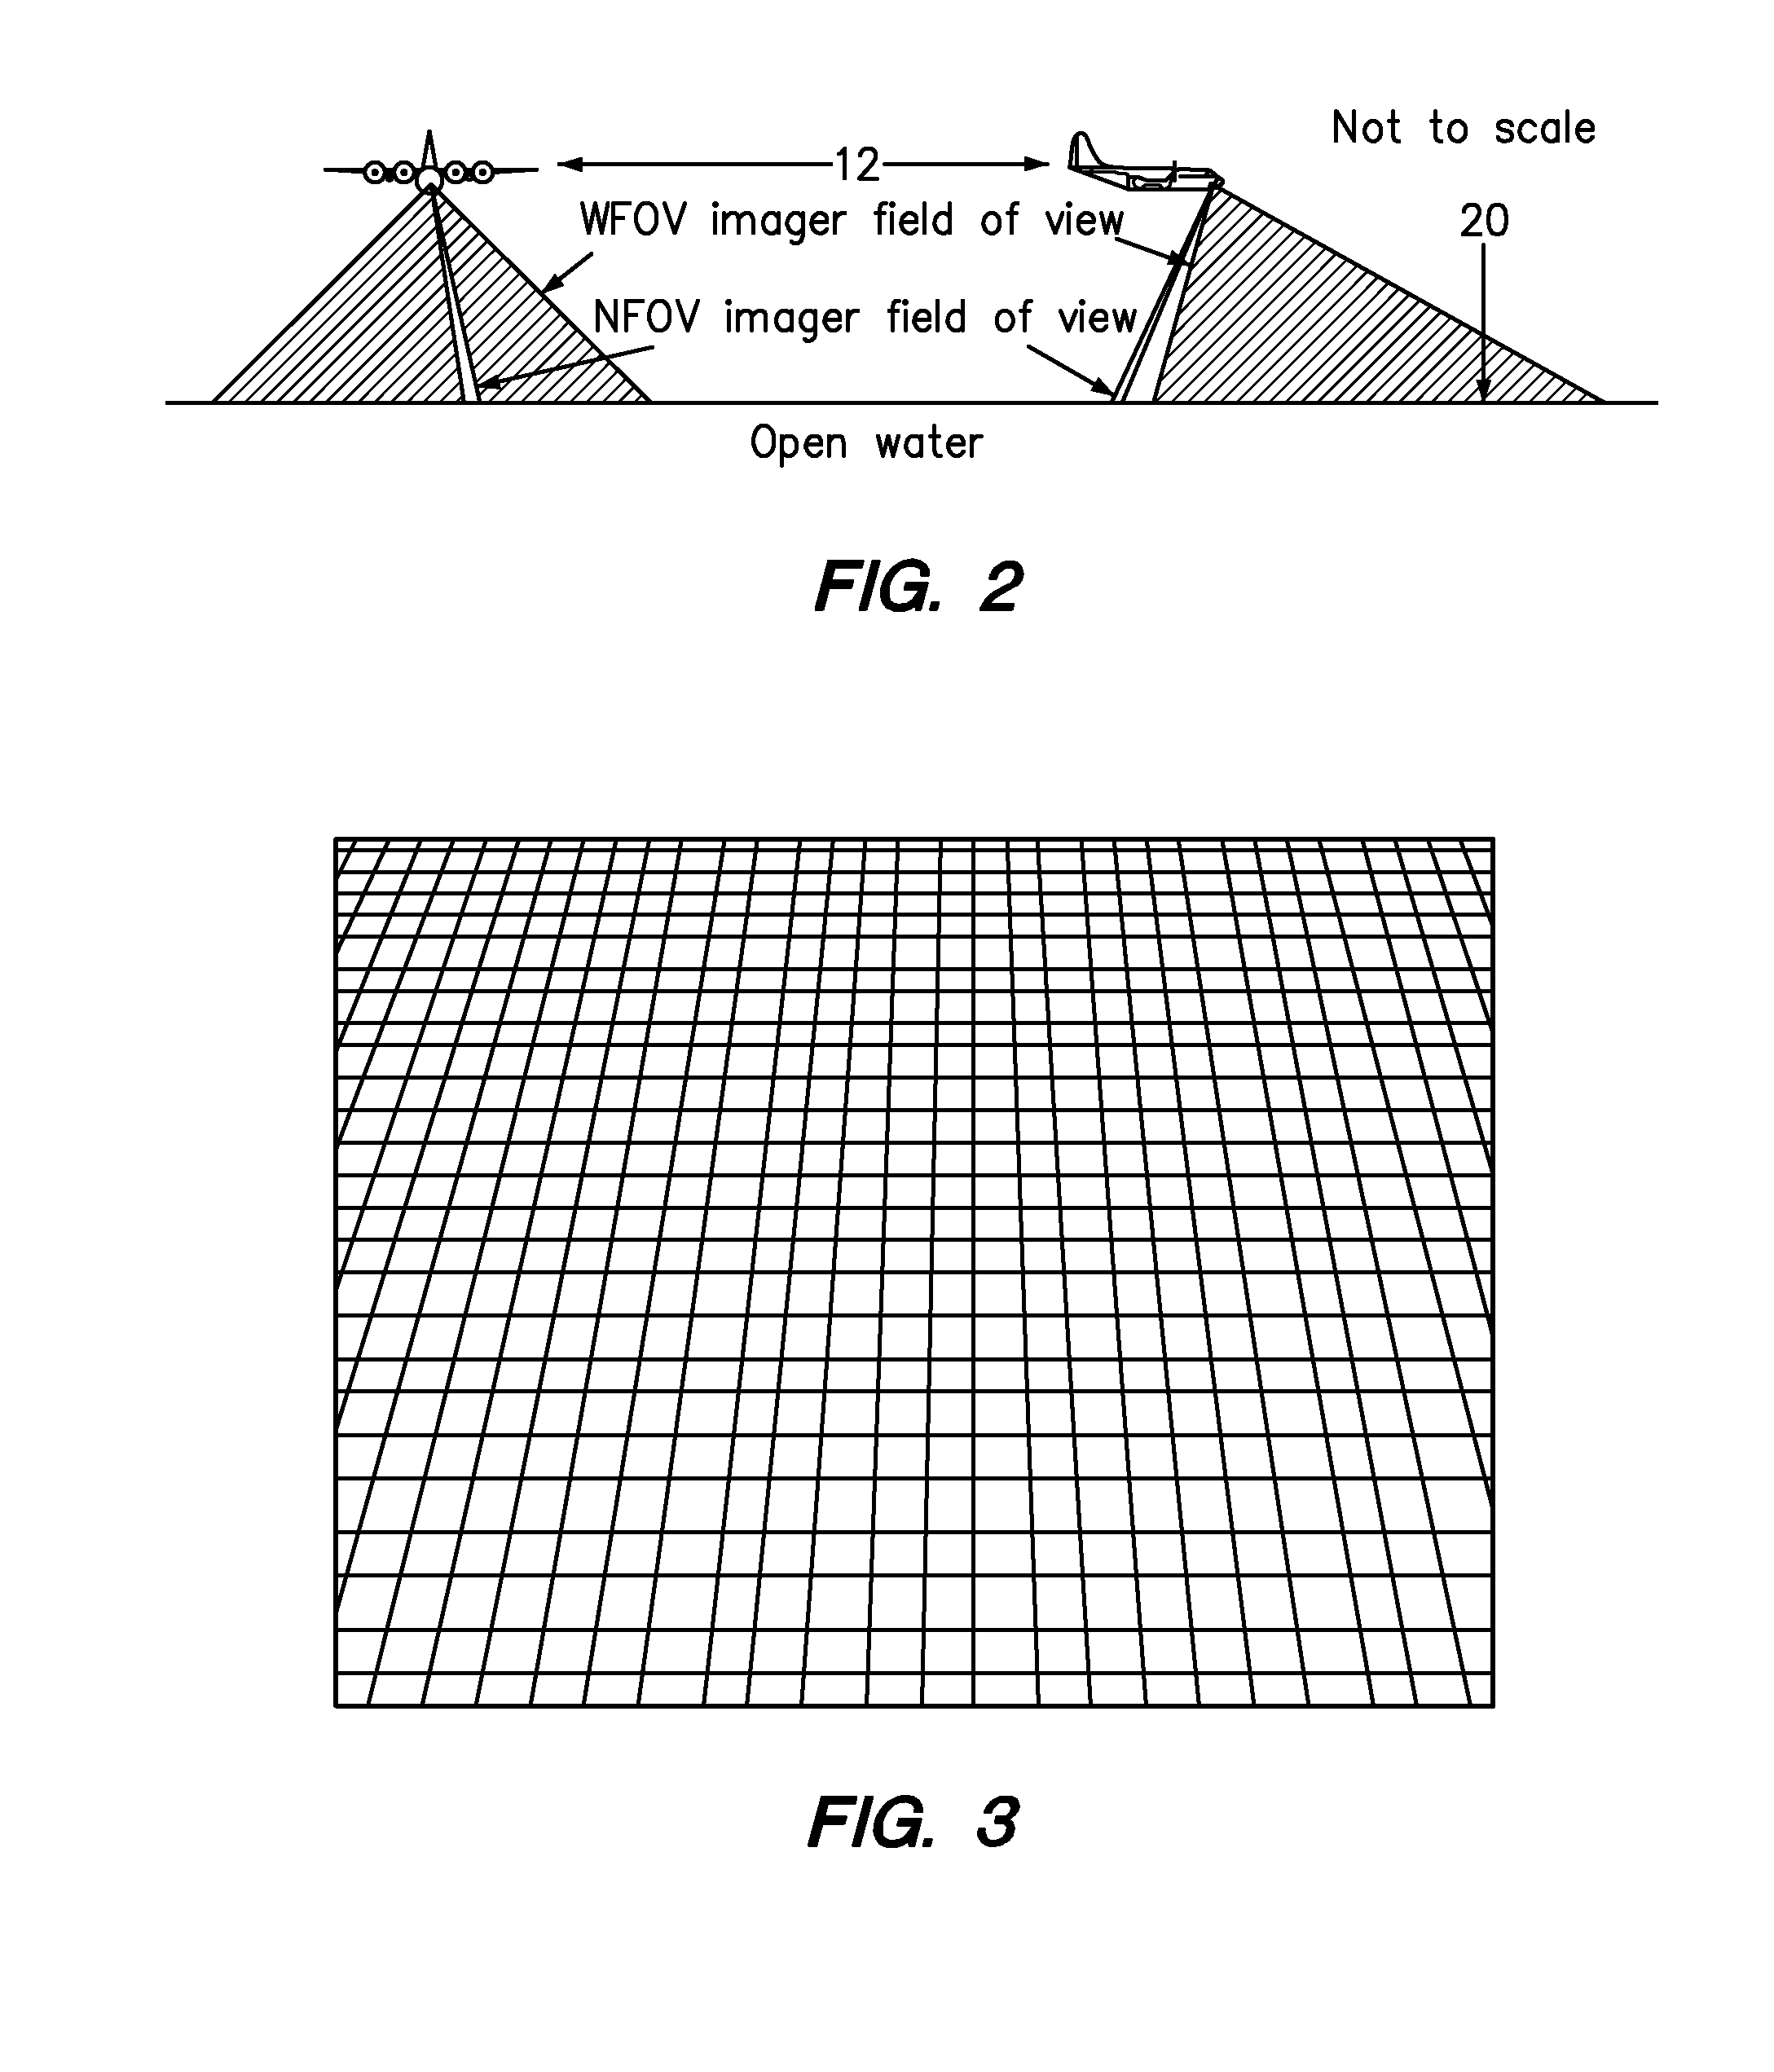 Method of searching for a thermal target